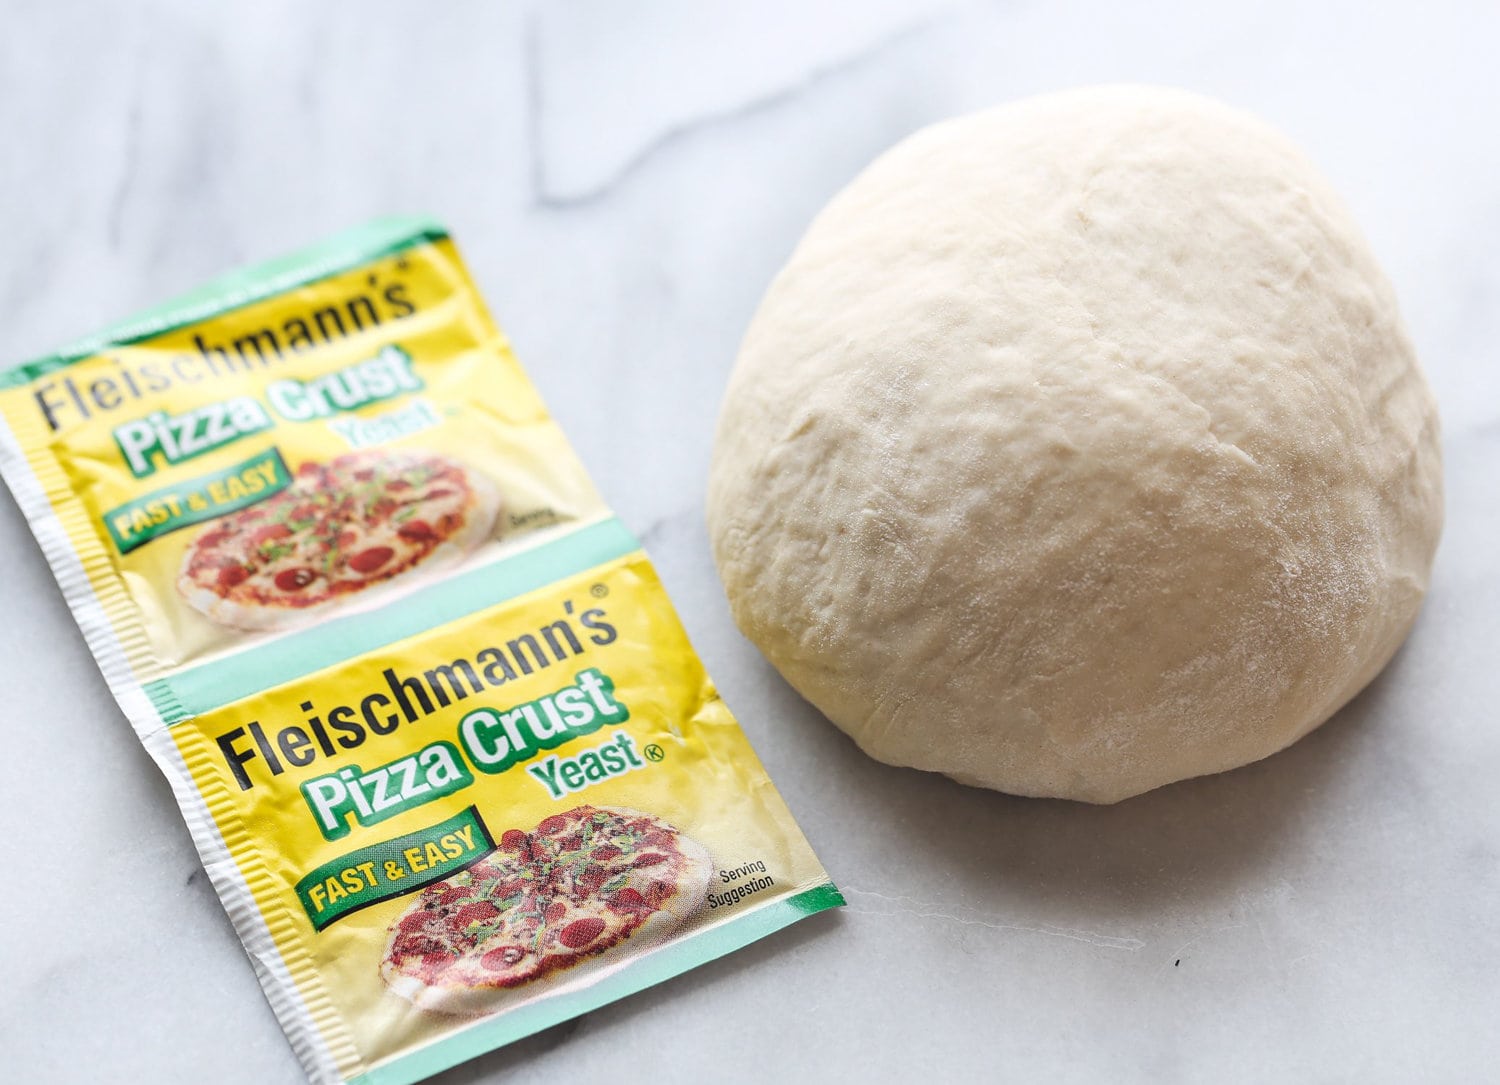 Pizza dough and pizza crust yeast